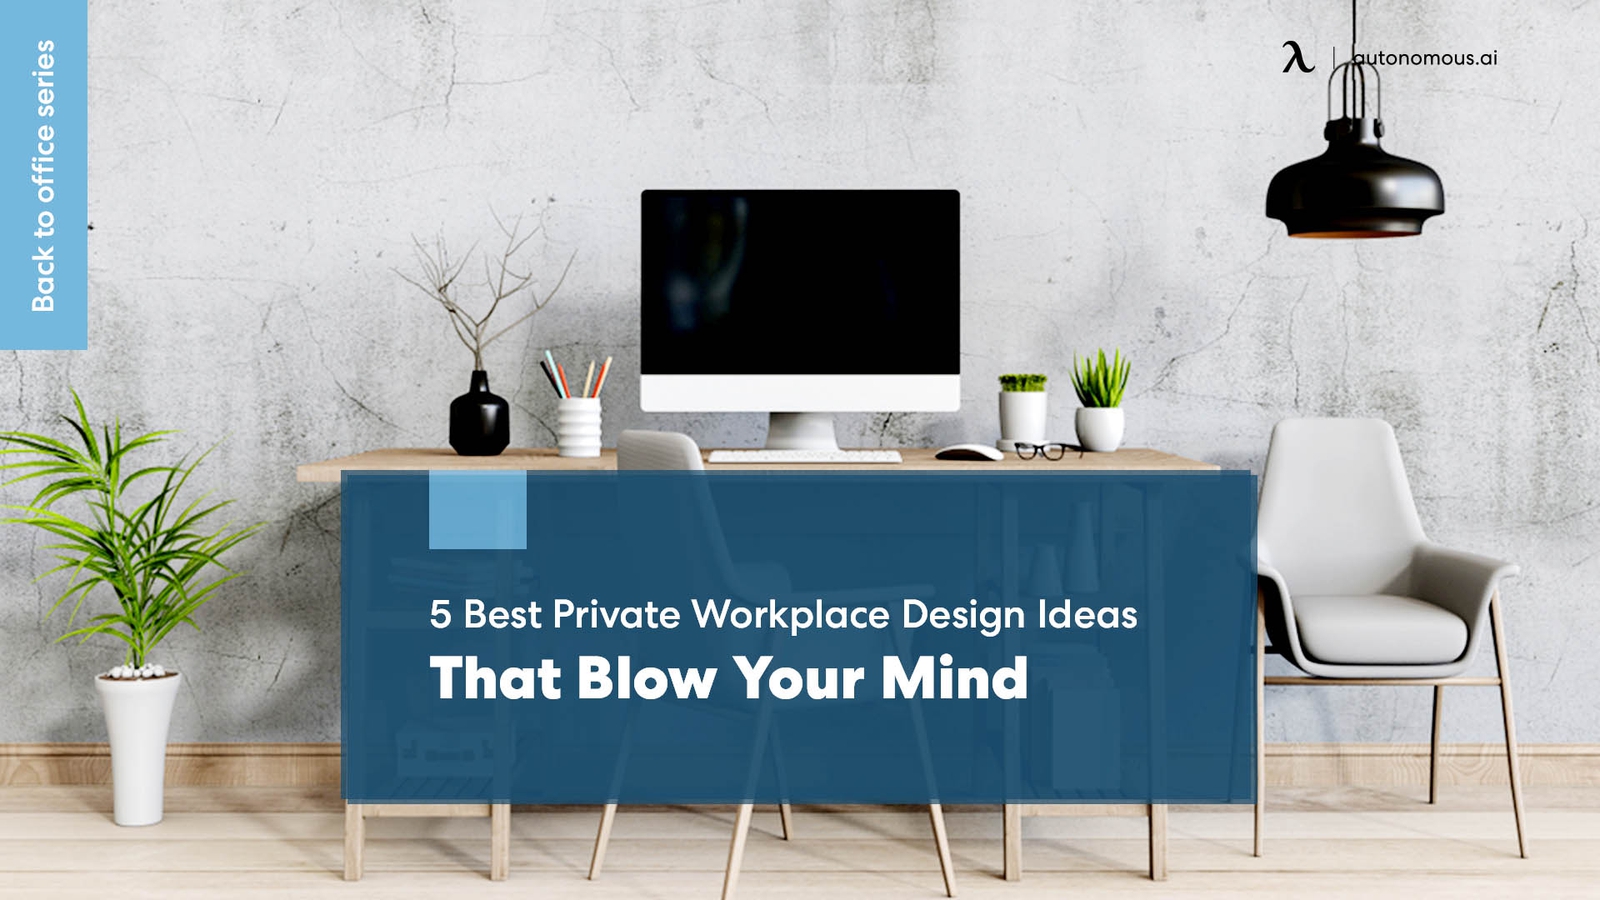 5 Best Private Workplace Design Ideas that Blow Your Mind